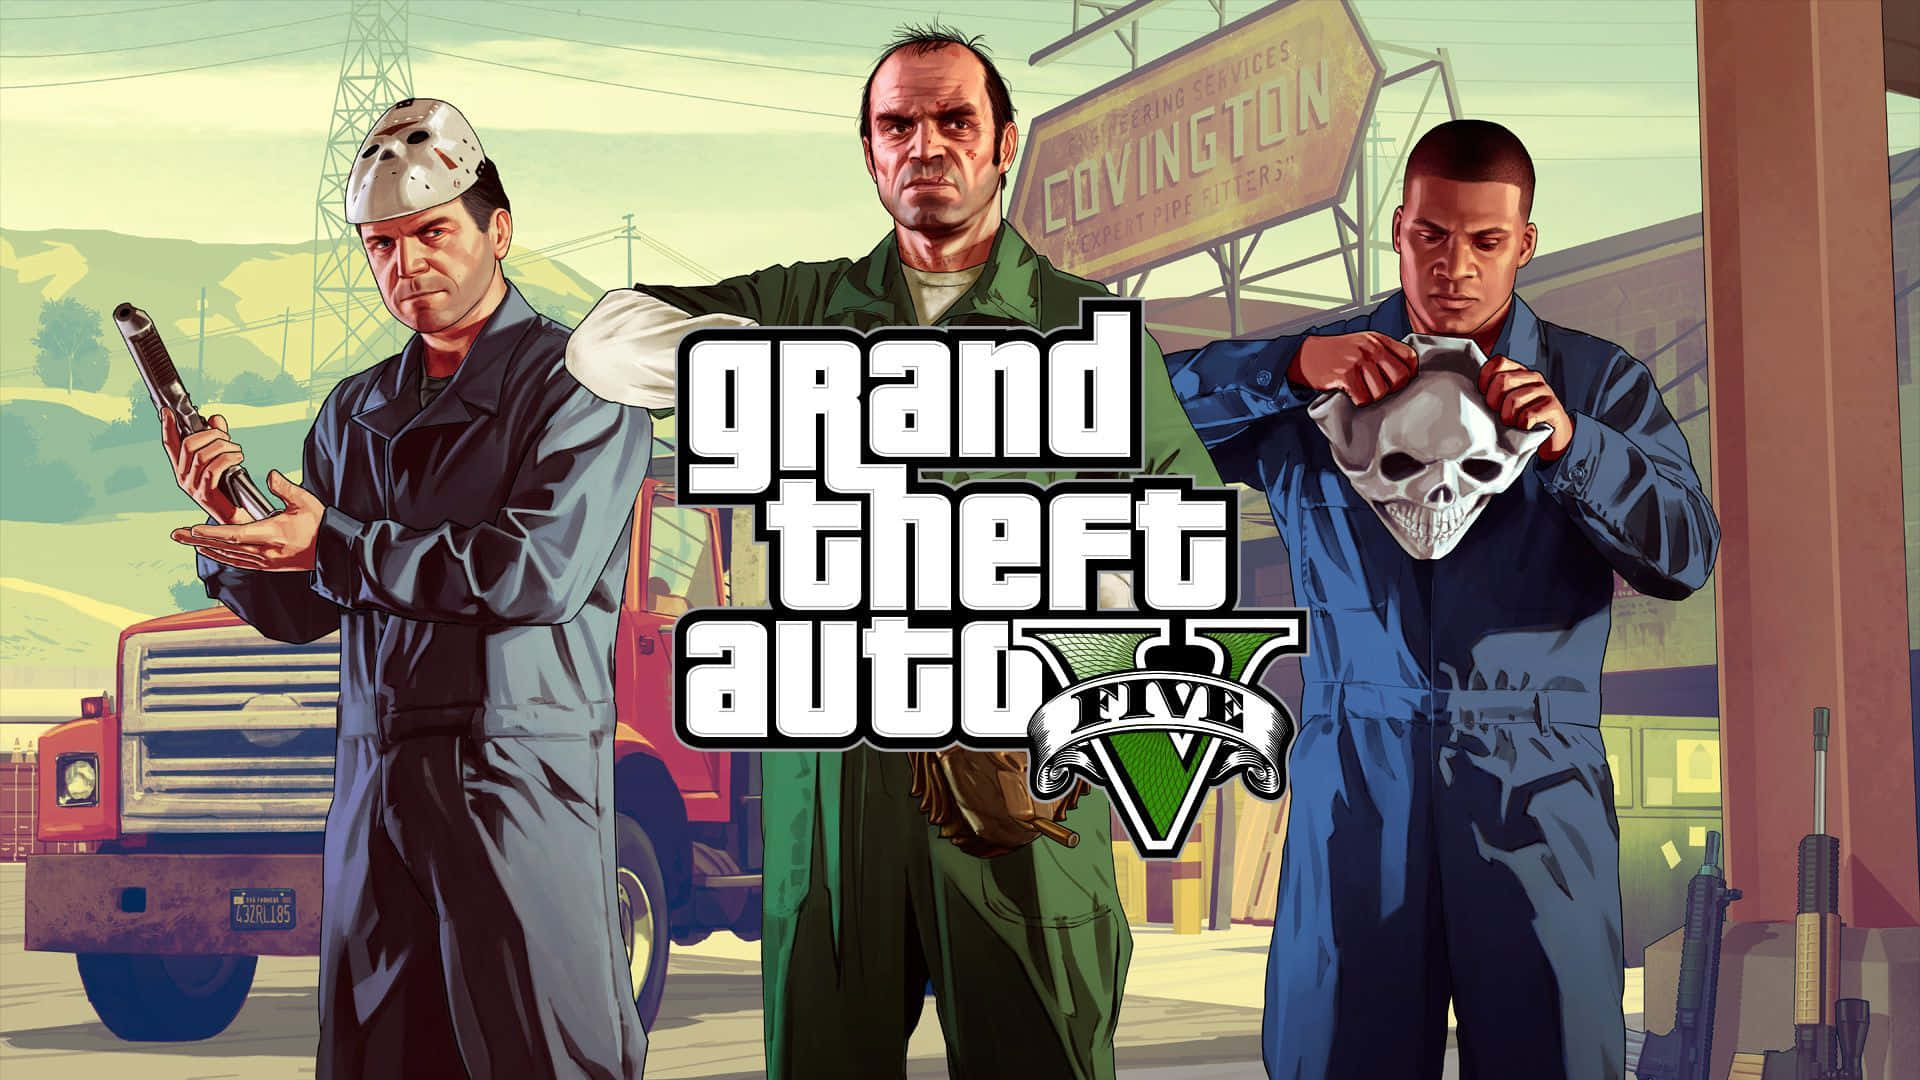 Grand Theft Auto 5: Strap On Your Seatbelt For An Adrenaline Filled Ride